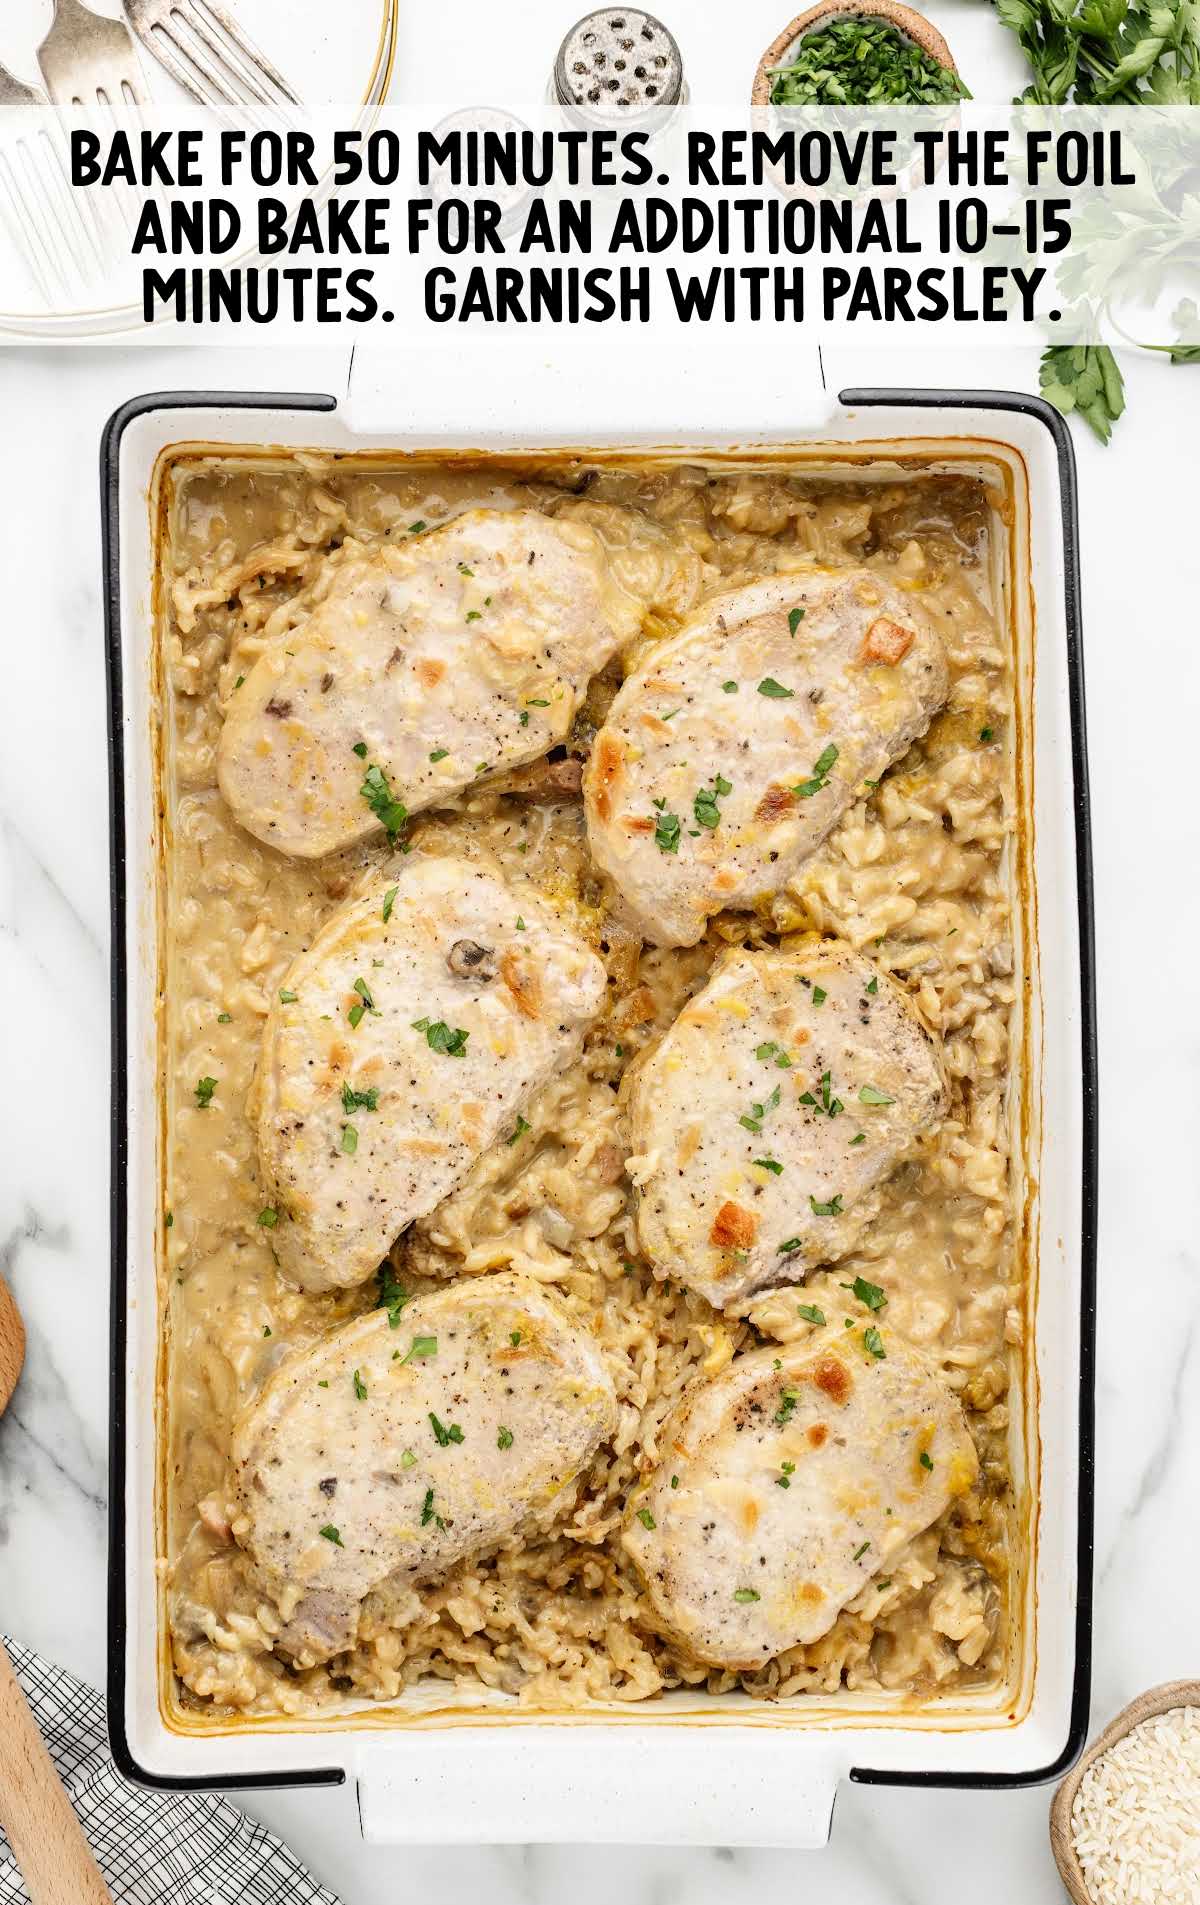 Pork Chop and Rice baked in a baking dish